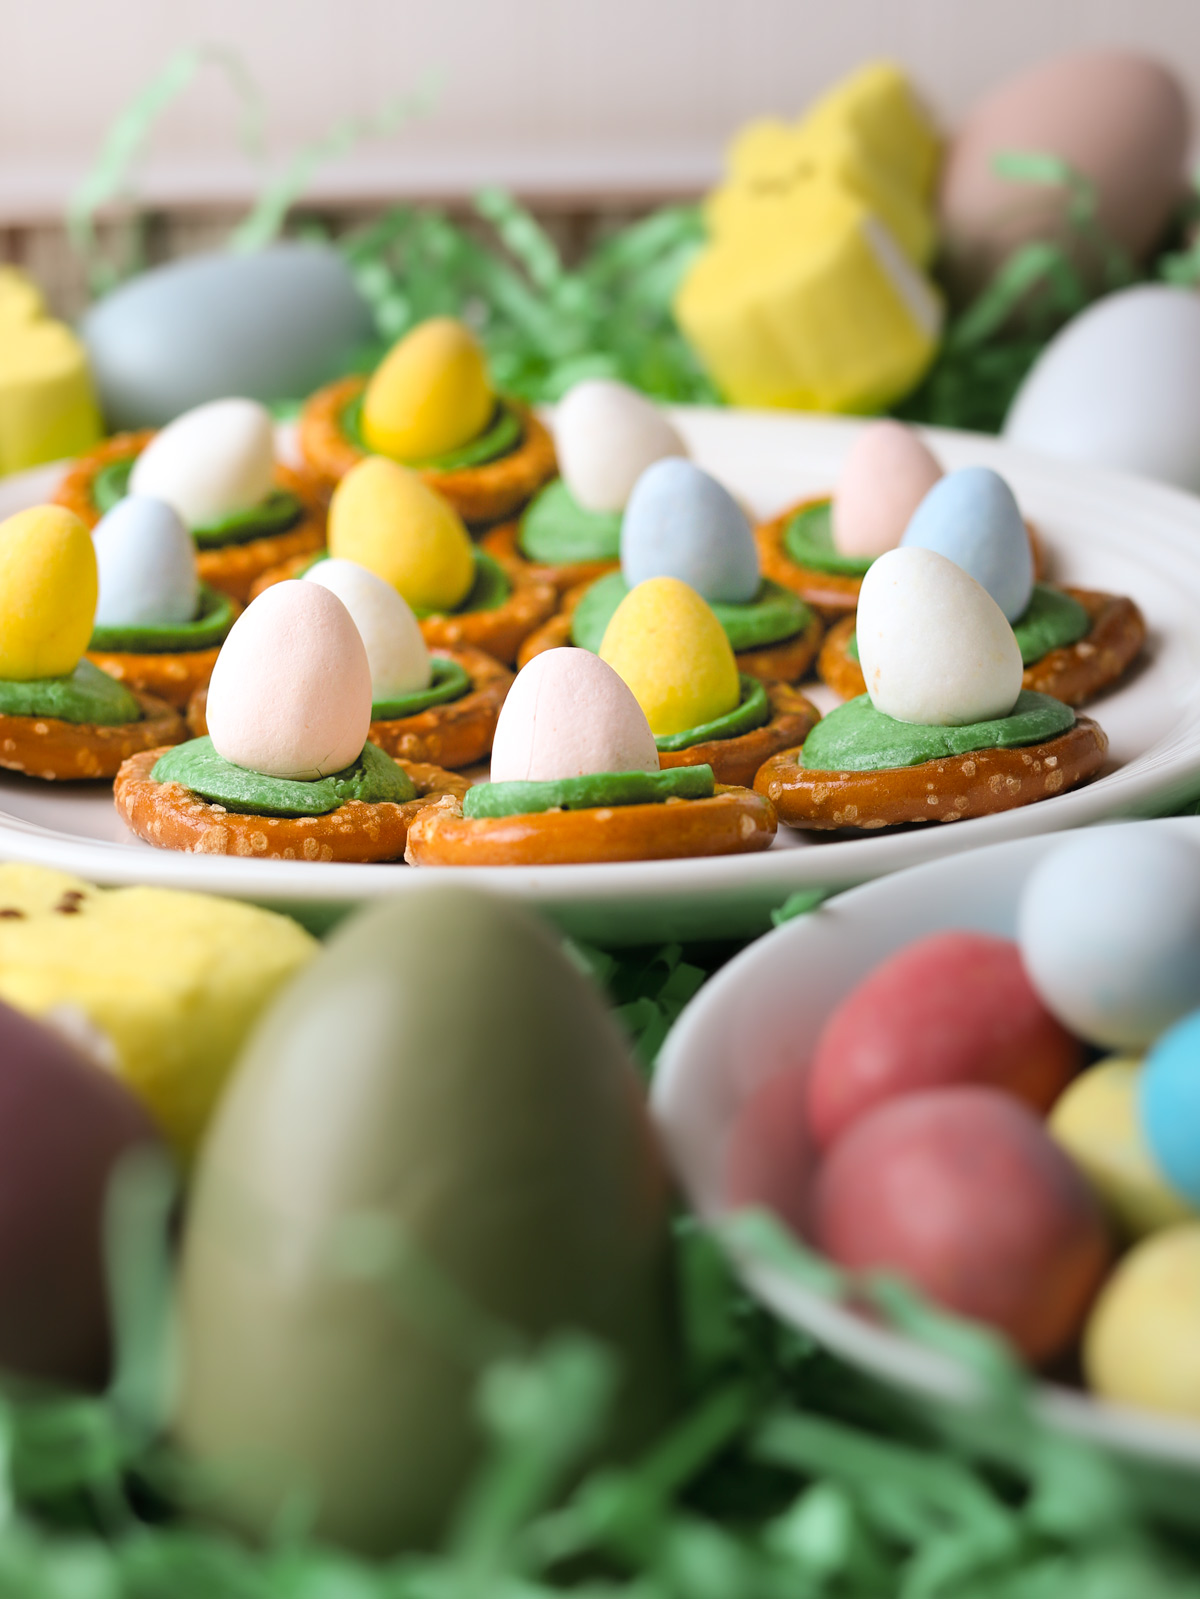 plate of Easter egg pretzels near other easter candy and eggs.